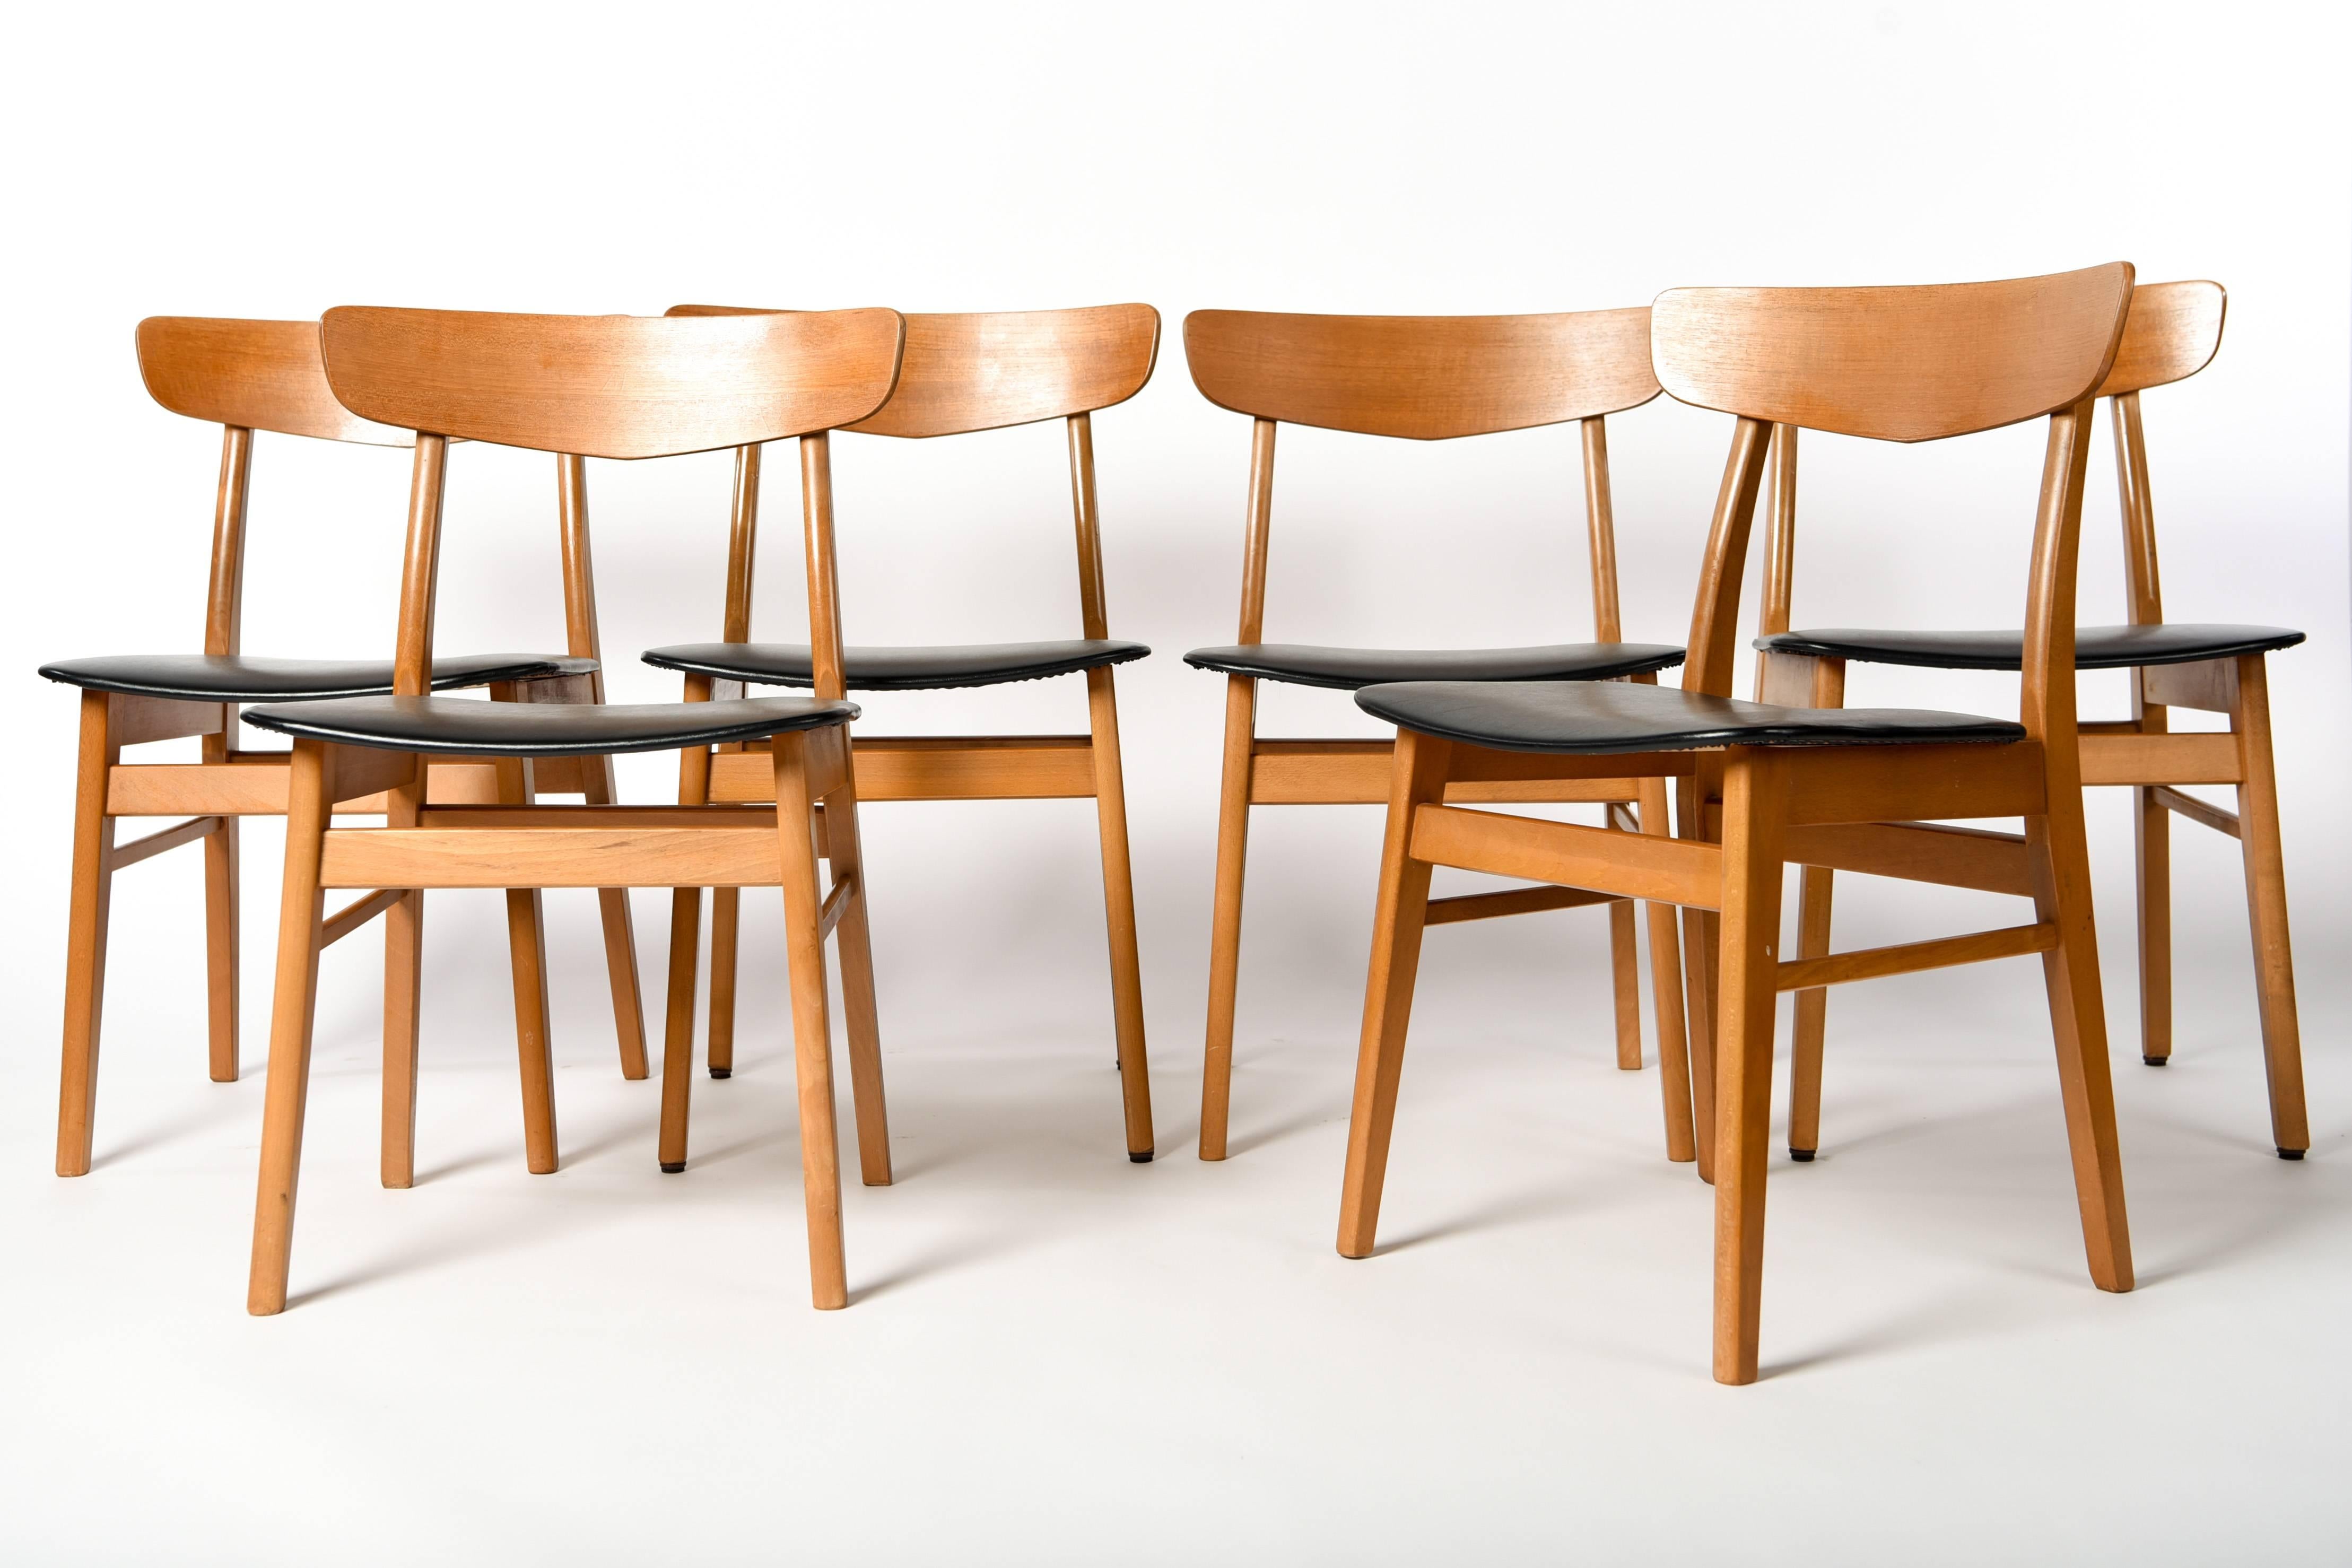 This is a set of six dining chairs made by SAX, circa 1960. Great Danish midcentury design. Featuring Classic teak frames with black seats, these chairs have a versatile appearance.